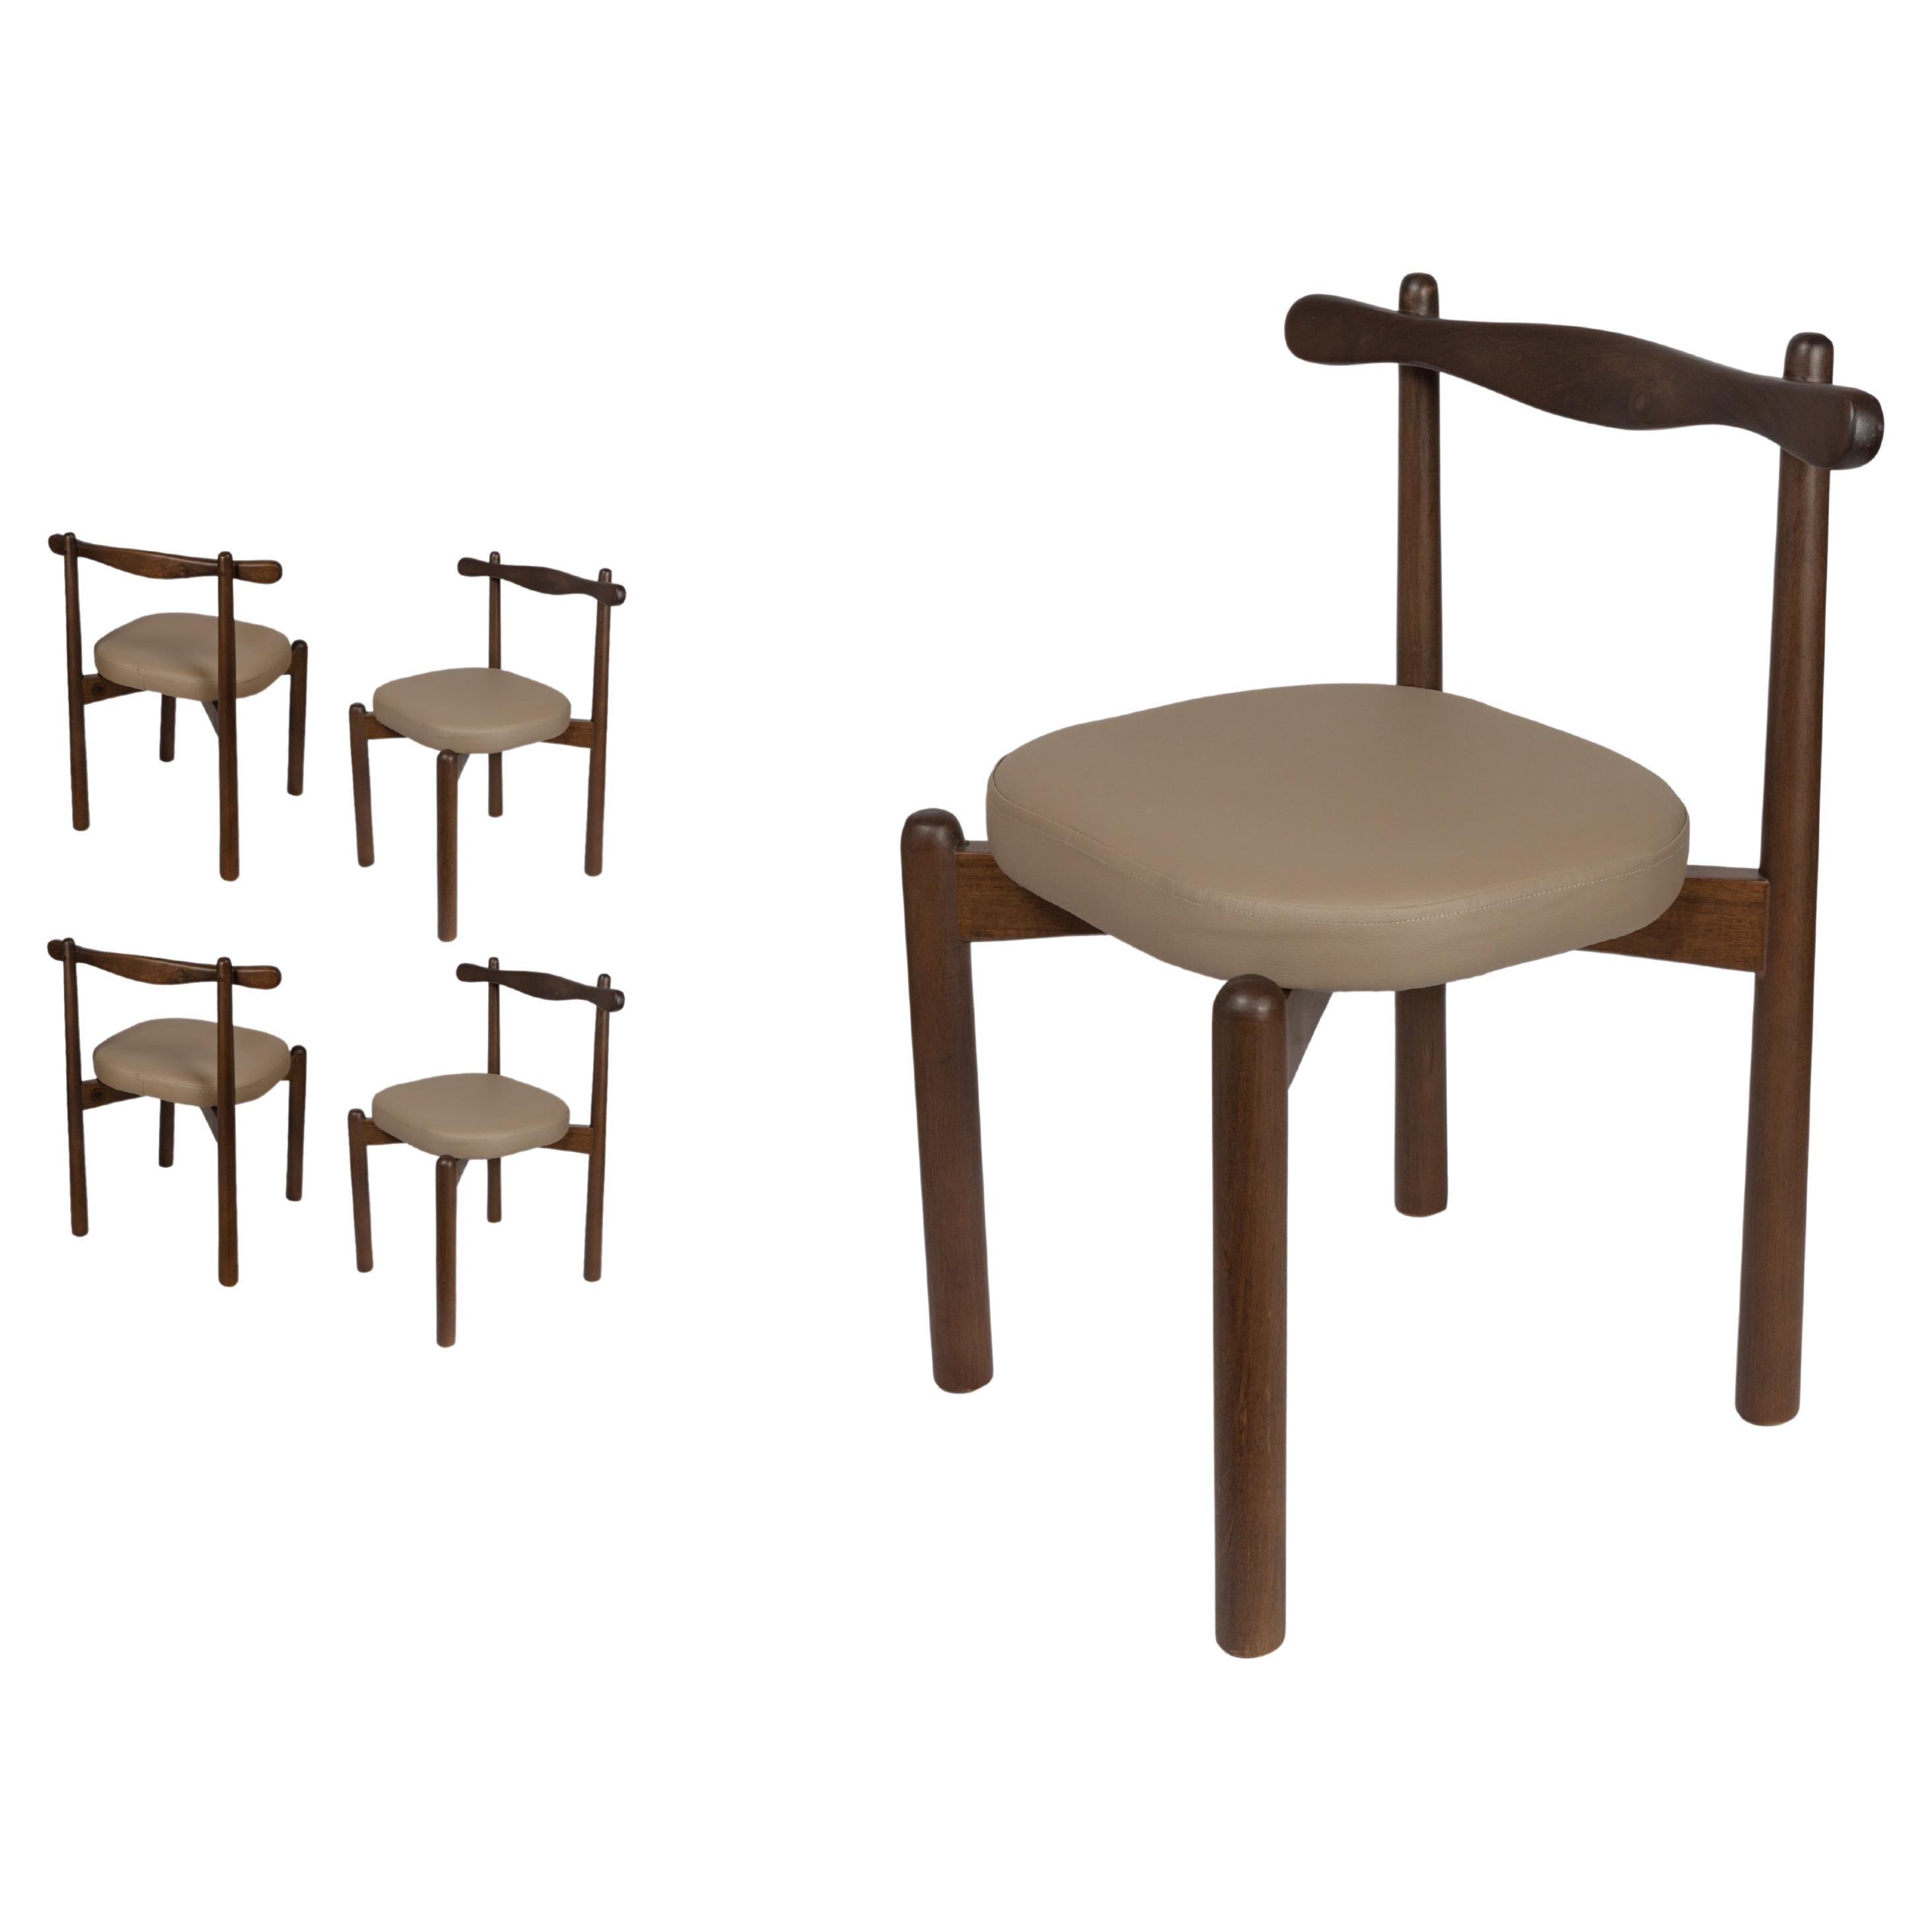 Set of 4 Dining Chairs Uçá Dark Brown Wood (fabric ref : F04) For Sale